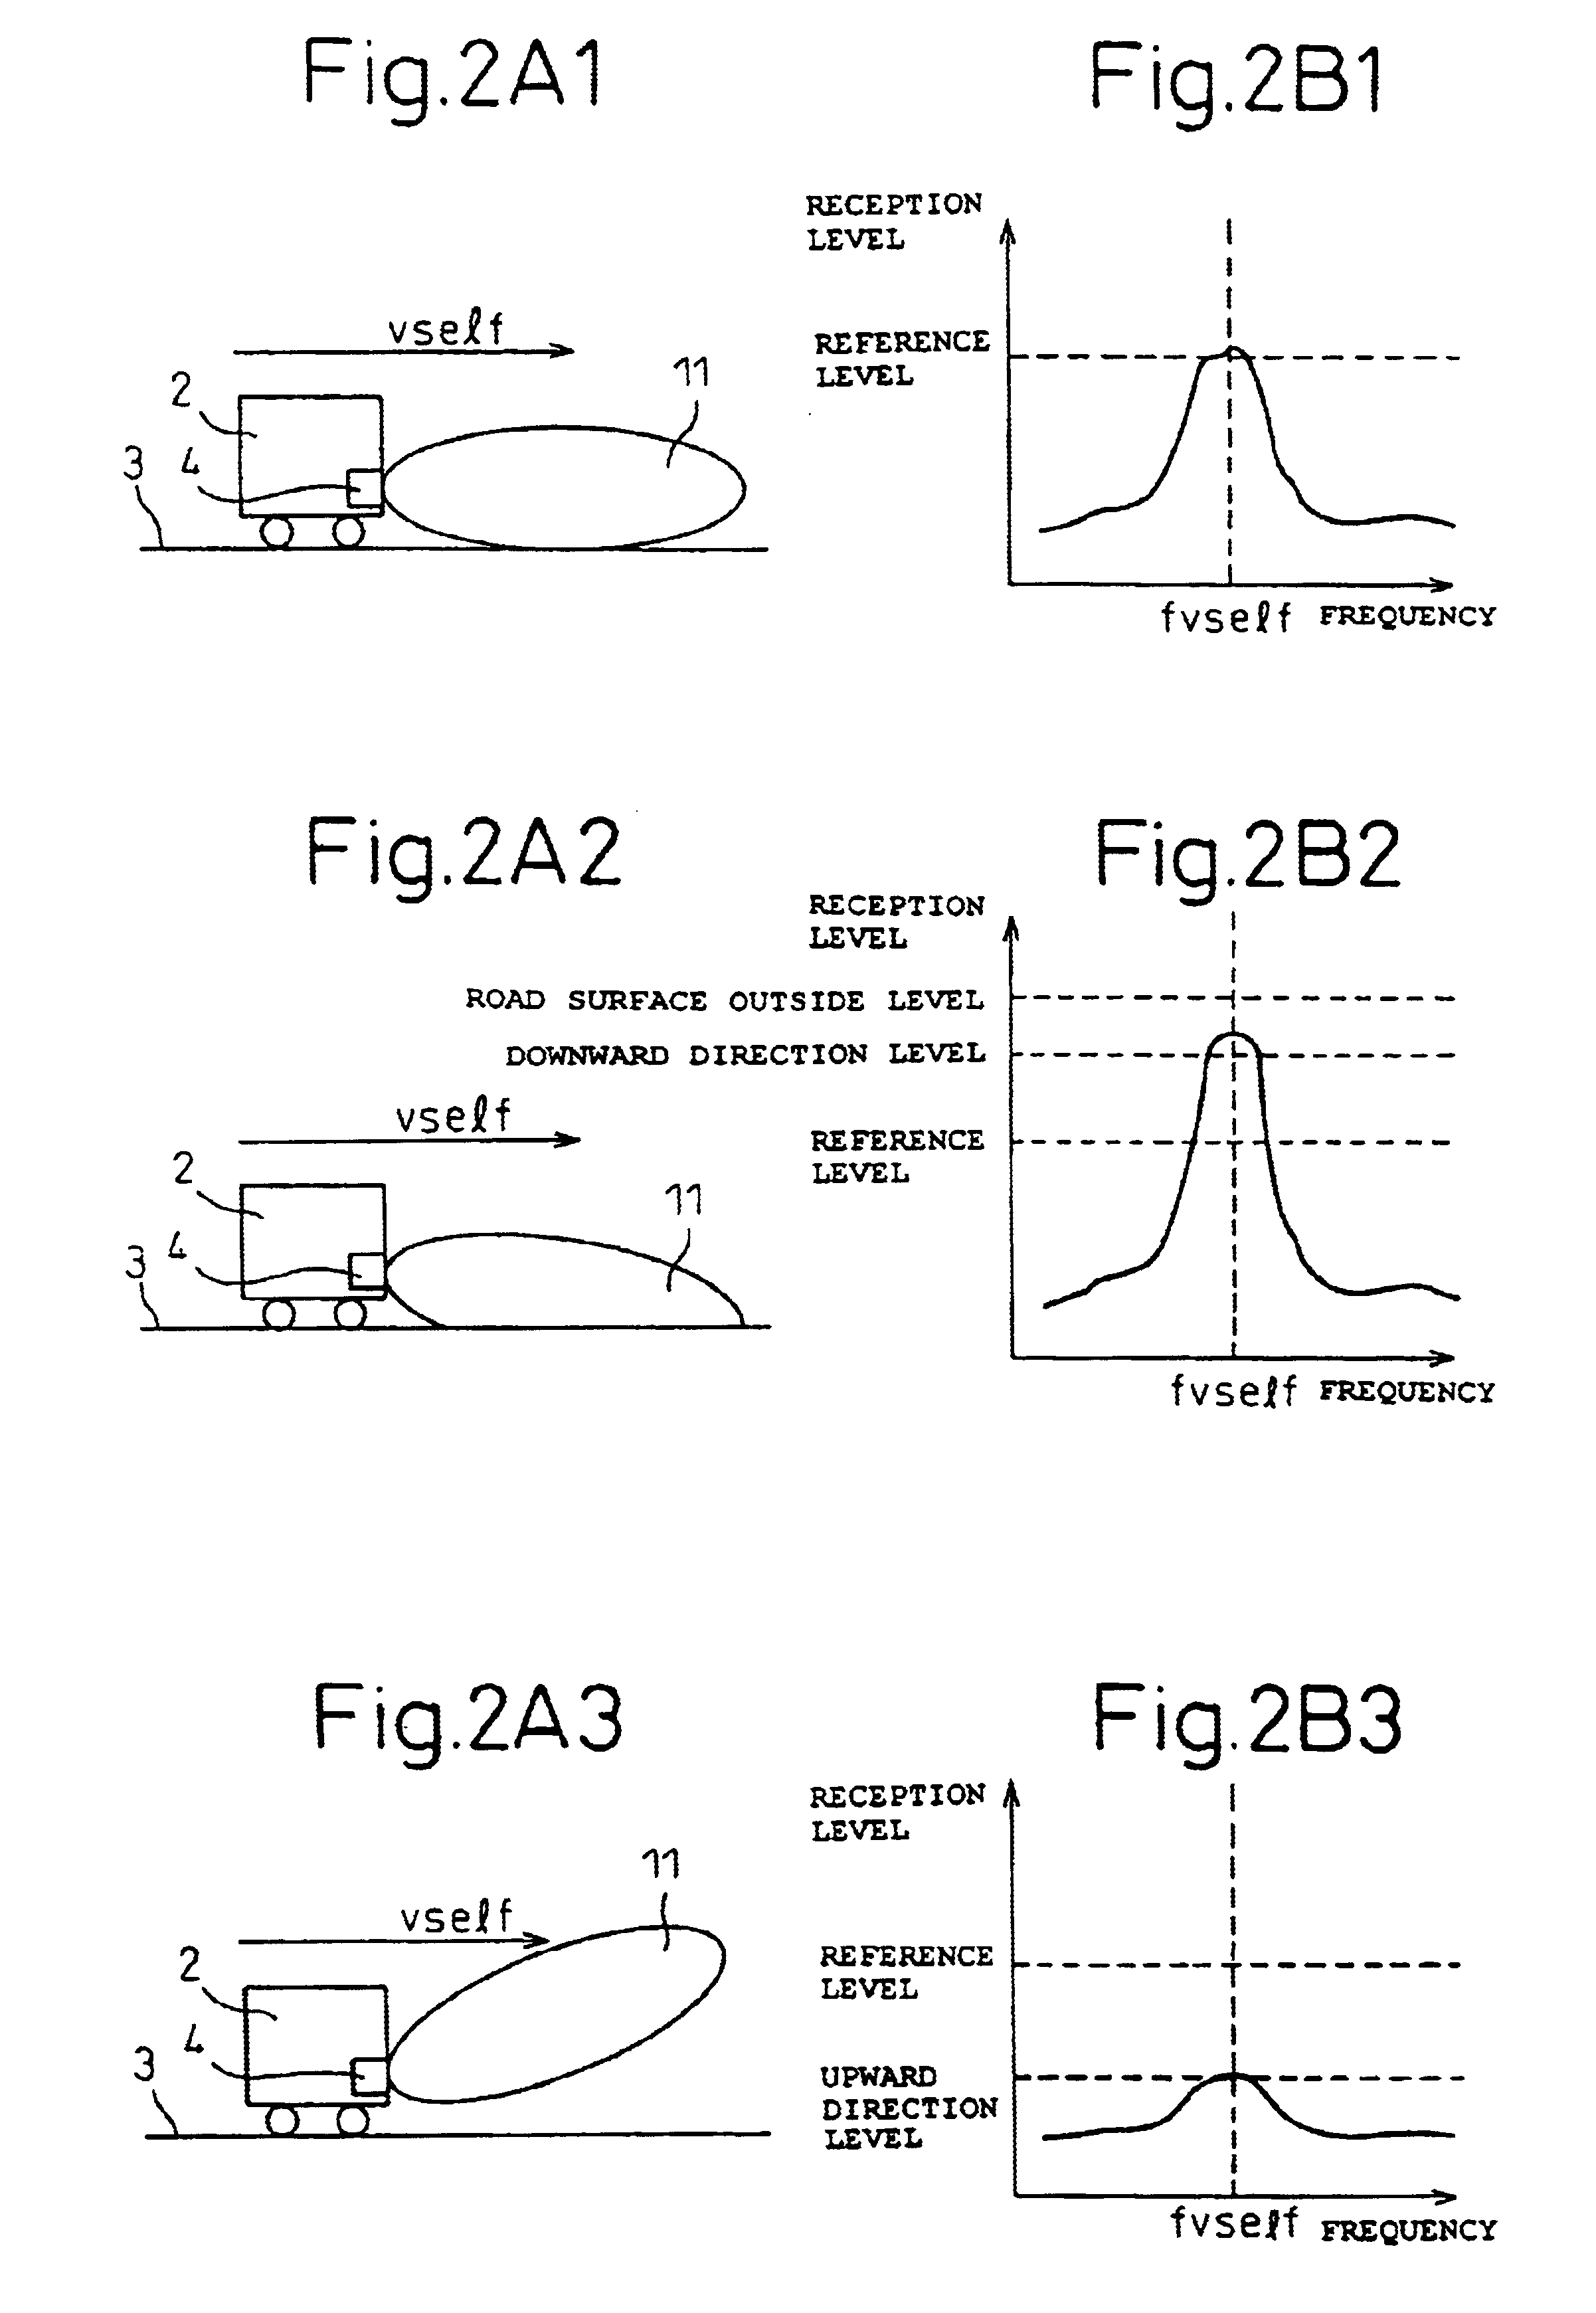 Road surface detection apparatus and apparatus for detecting upward/downward axis displacement of vehicle-mounted radar